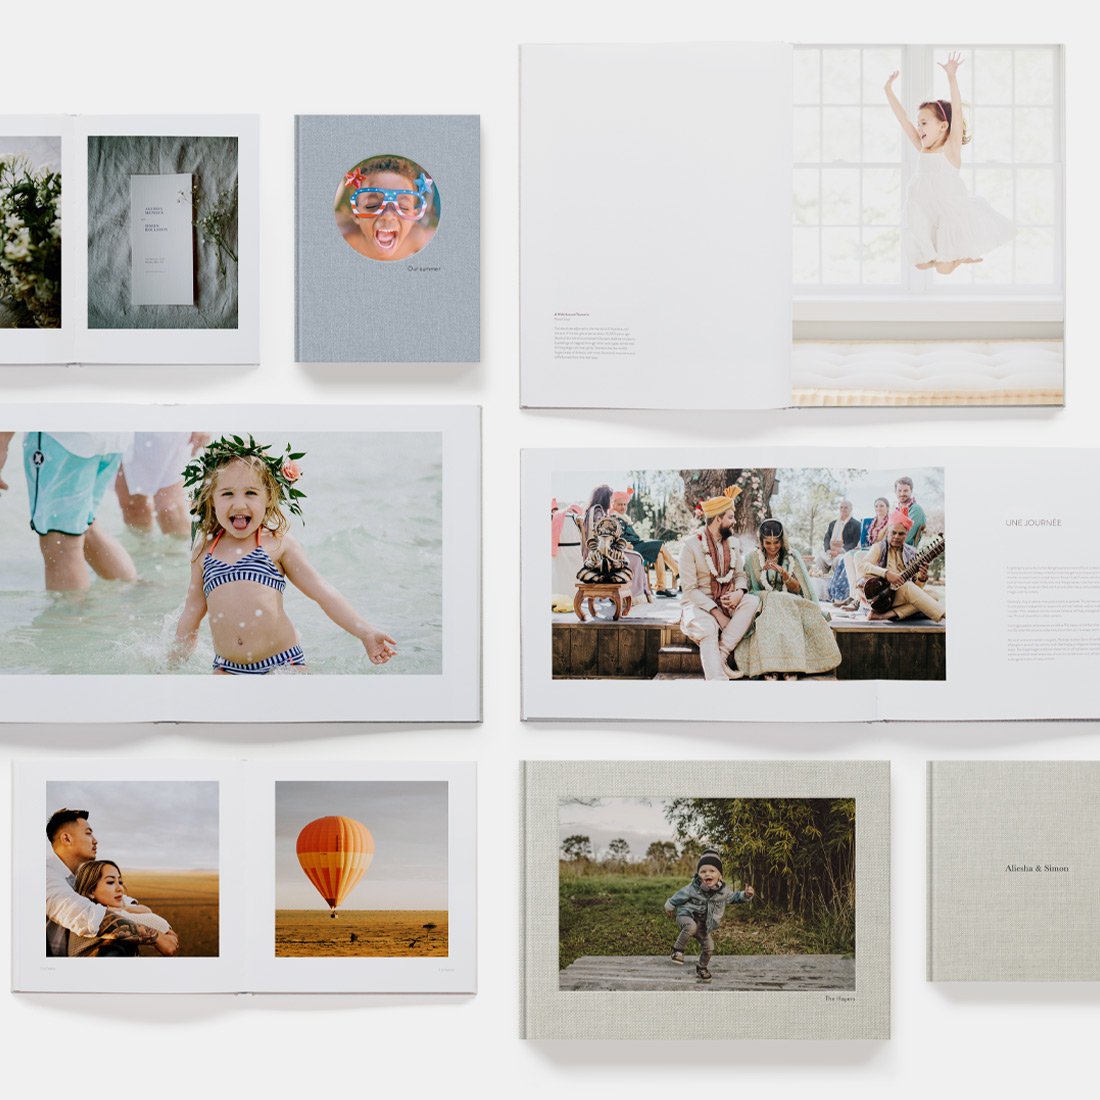 Collection of photo books showing different template options for spreads and covers